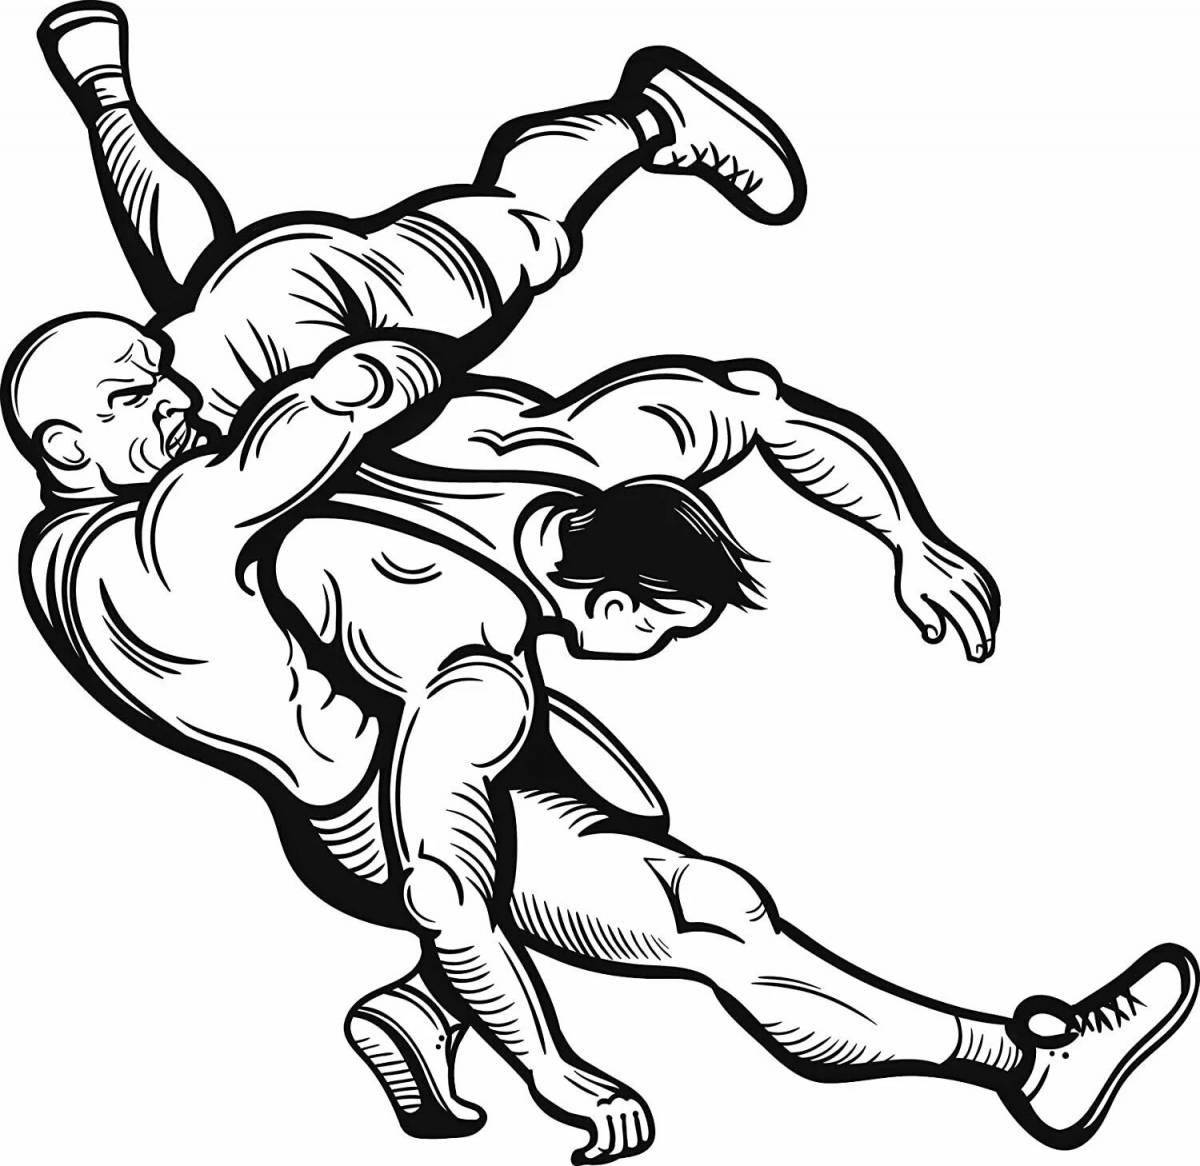 Sport coloring pages wrestlers